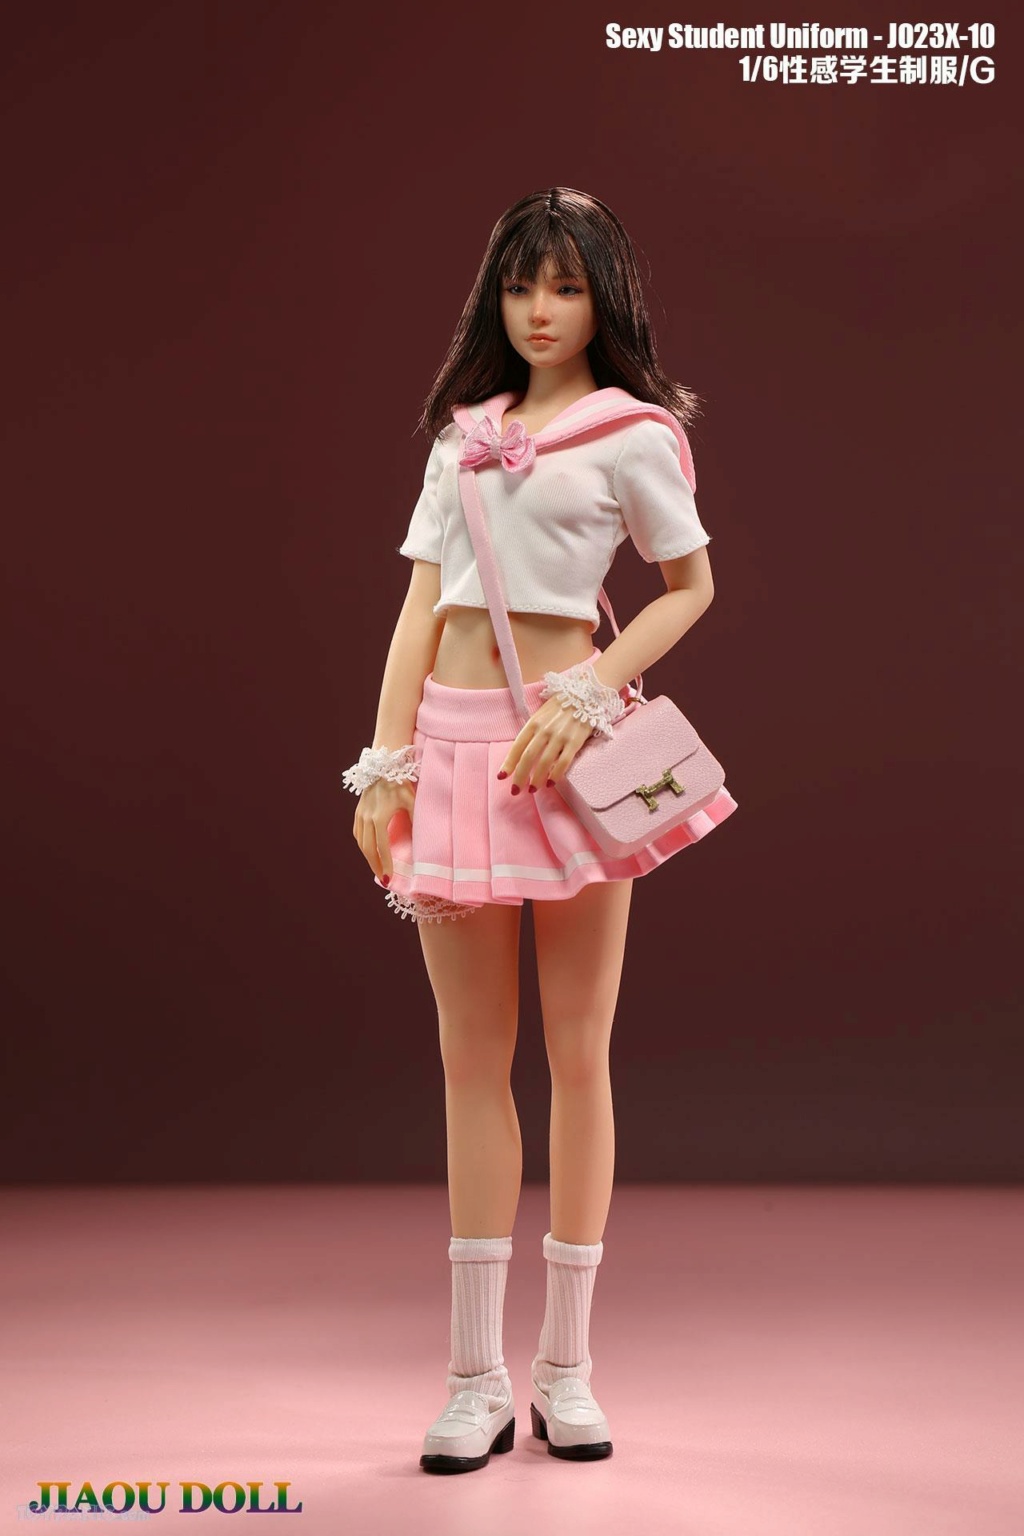 female - NEW PRODUCT: Jiaou Doll: 1/6 Sexy Student Uniform (7 color options) (JO23X-10A-G) (NSFW) 20920242